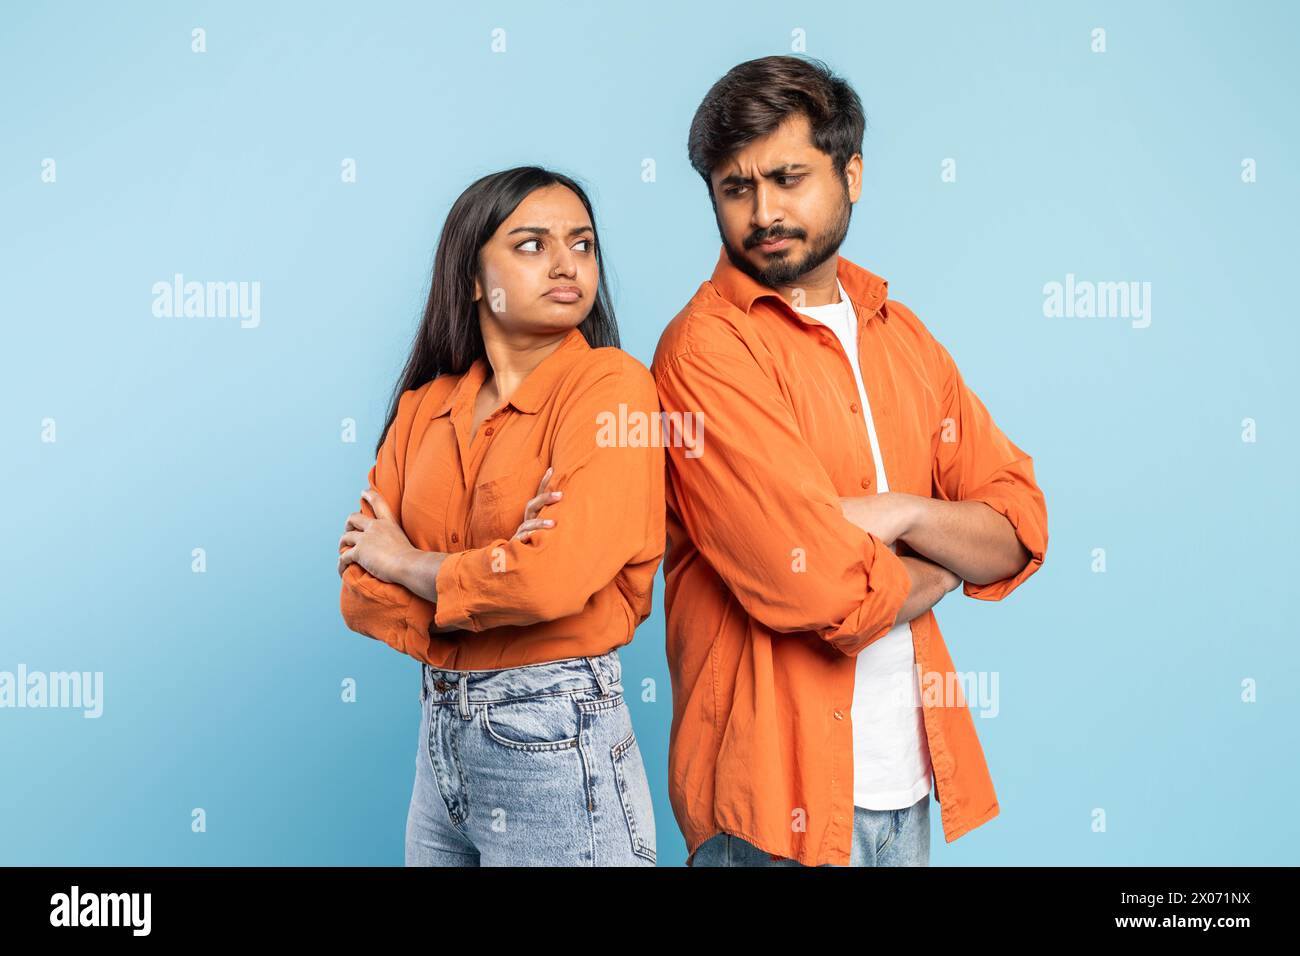 Couple with arms crossed in disagreement on blue background Stock Photo